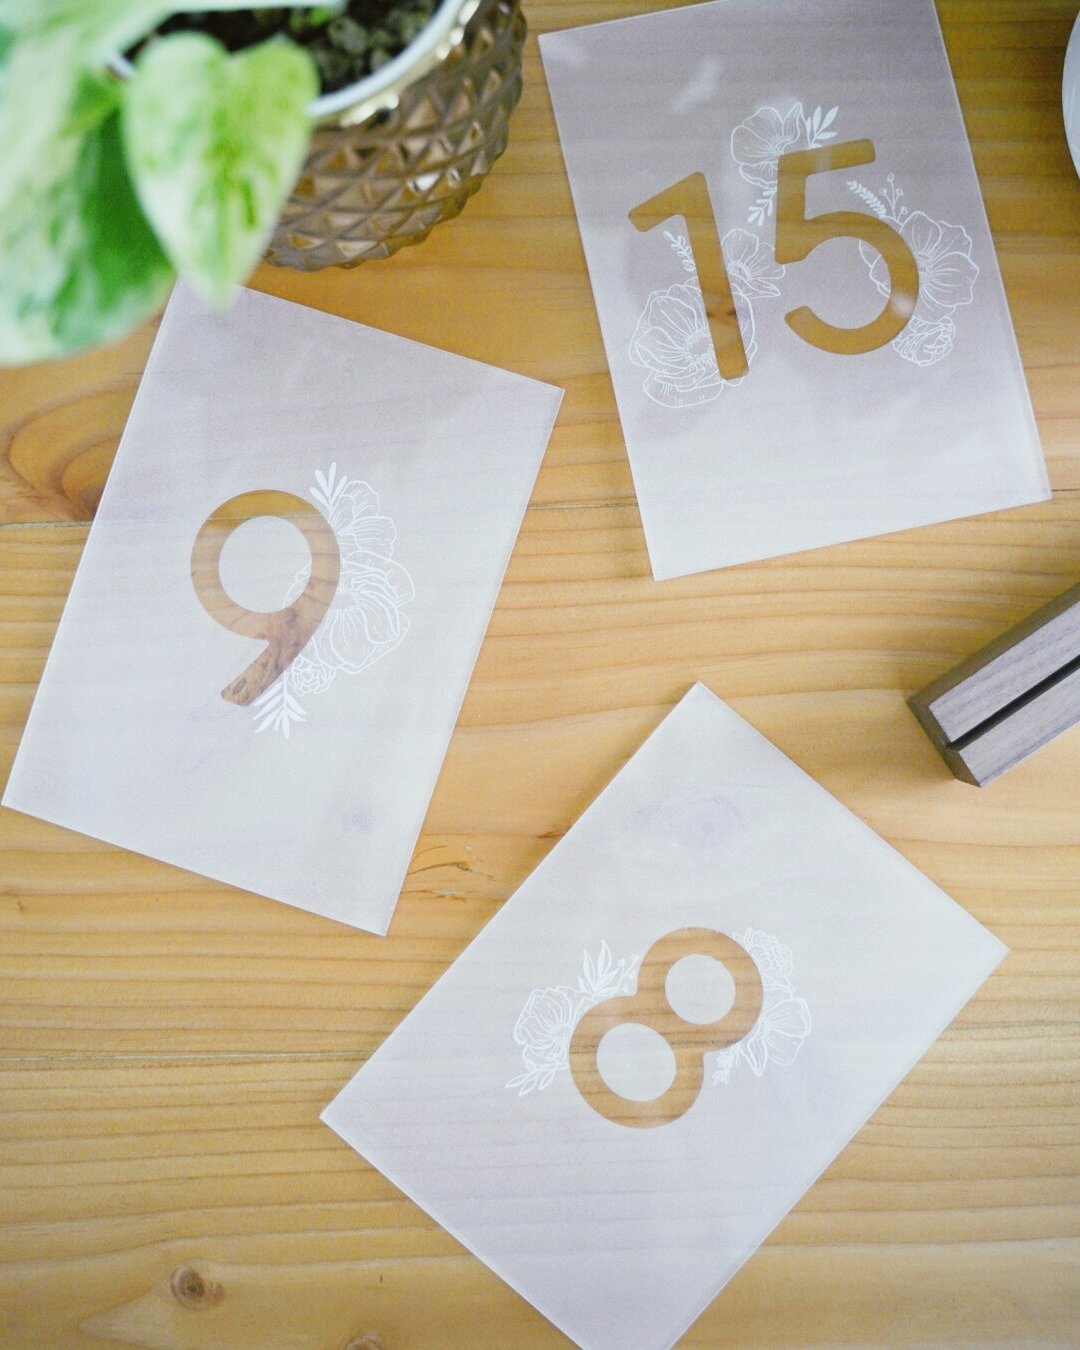 Designed these table numbers for our wedding! And still waiting for our wedding (part 2 in July) to use them... 🤣🤷🏻&zwj;♀️⠀⠀⠀⠀⠀⠀⠀⠀⠀
⠀⠀⠀⠀⠀⠀⠀⠀⠀
Can you believe we&rsquo;re reaching the one year mark of this pandemic? Personally, career wise, it was 